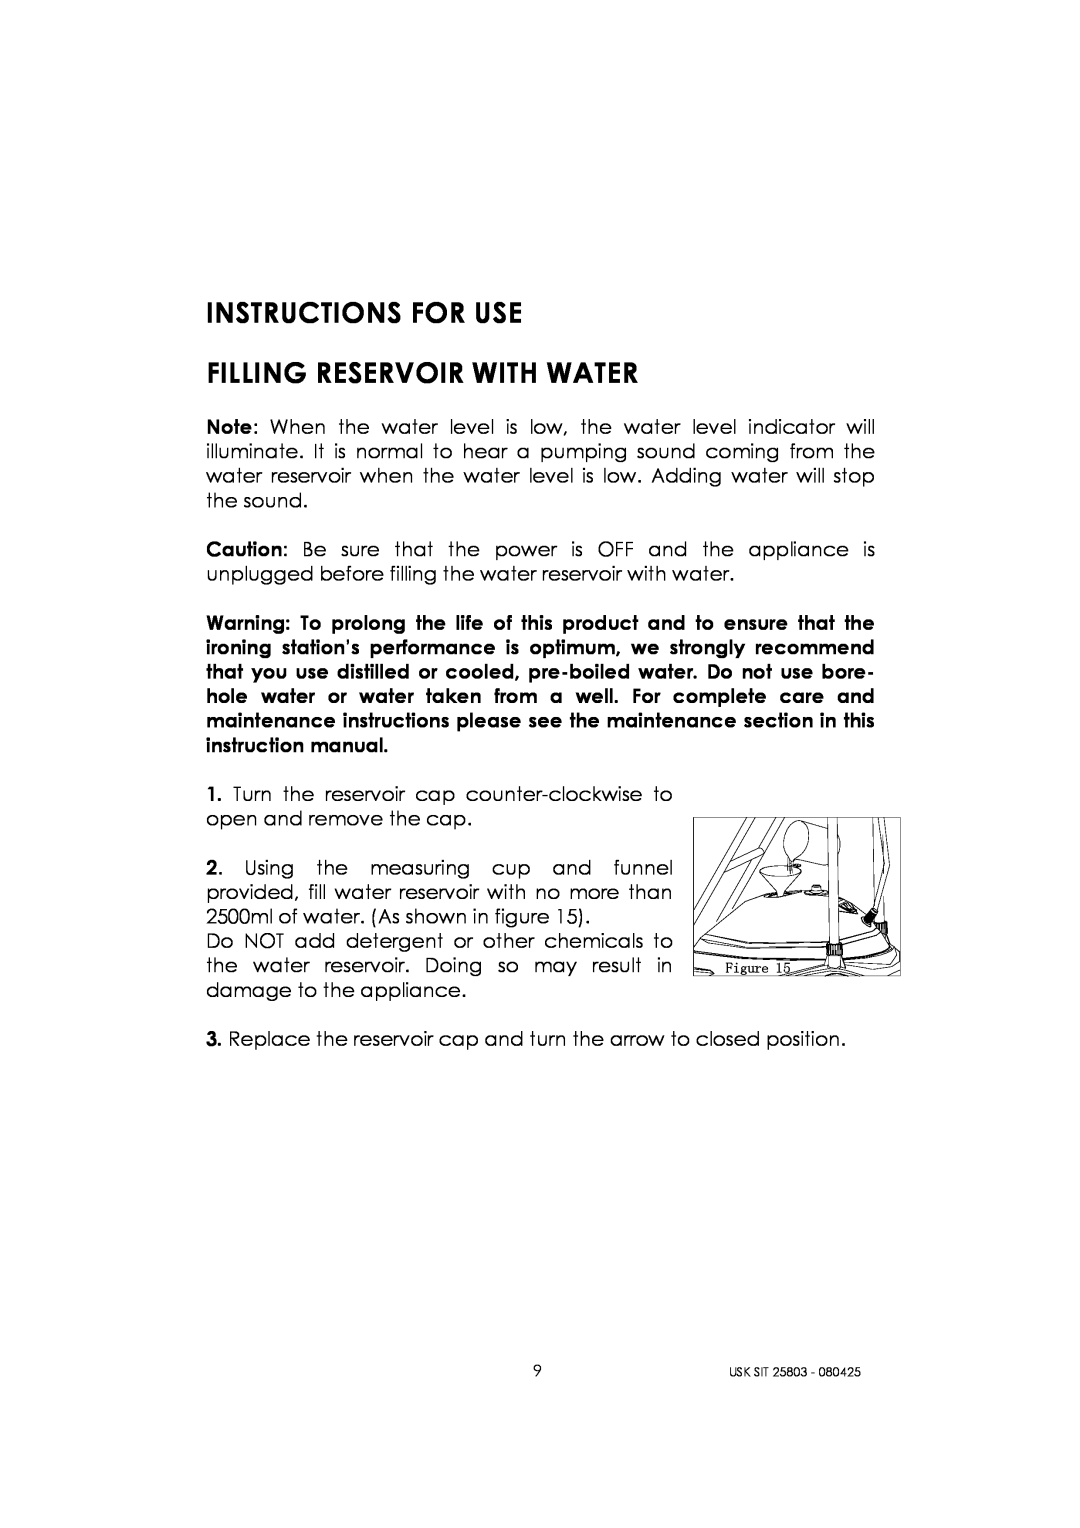 Kalorik USK SIT 25803 manual Instructions For Use Filling Reservoir With Water 